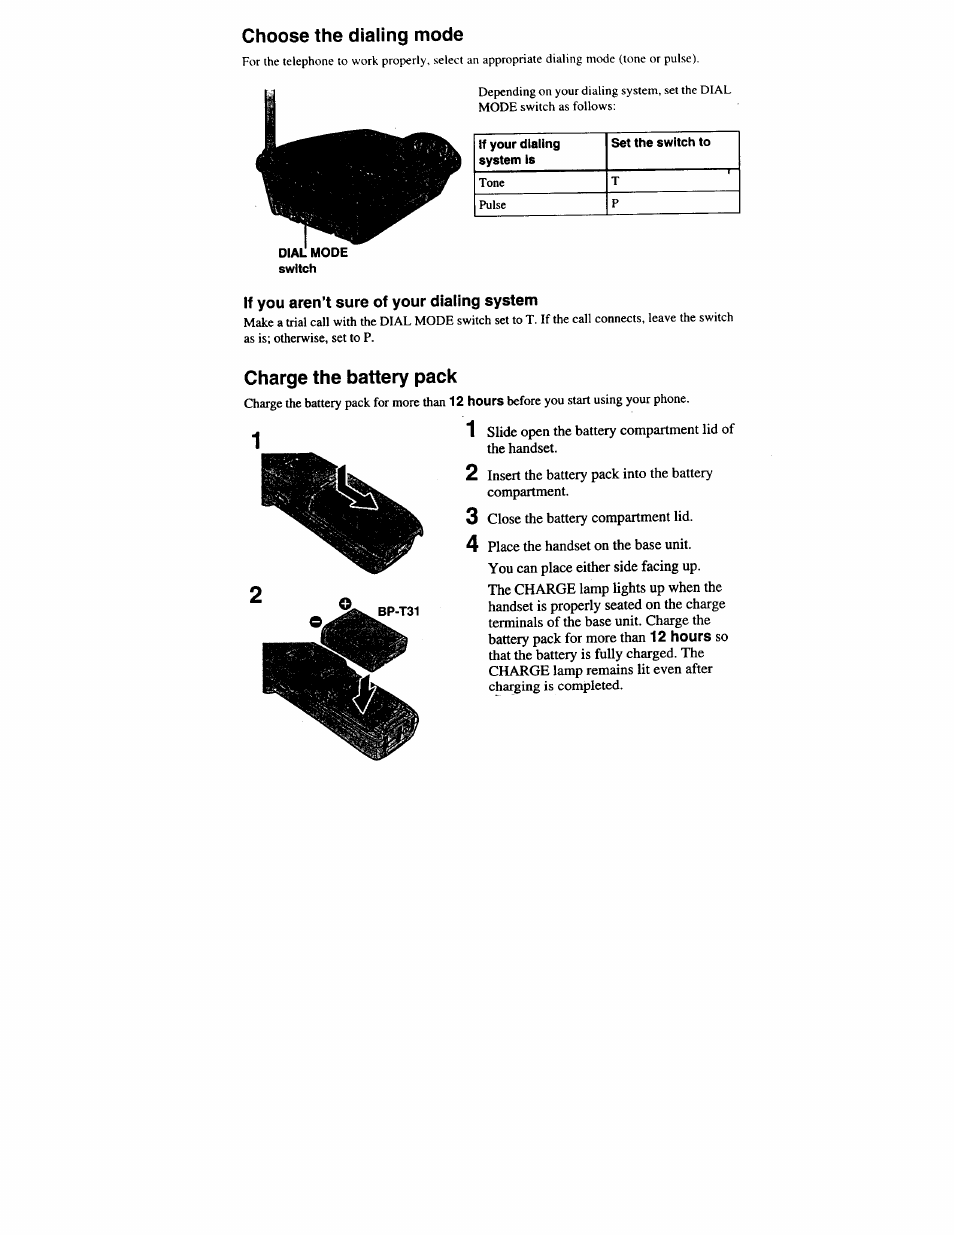 Choose the dialing mode, If you aren’t sure of your dialing system, Charge the battery pack | Sony SPP-S9001 Manuel d'utilisation | Page 5 / 26